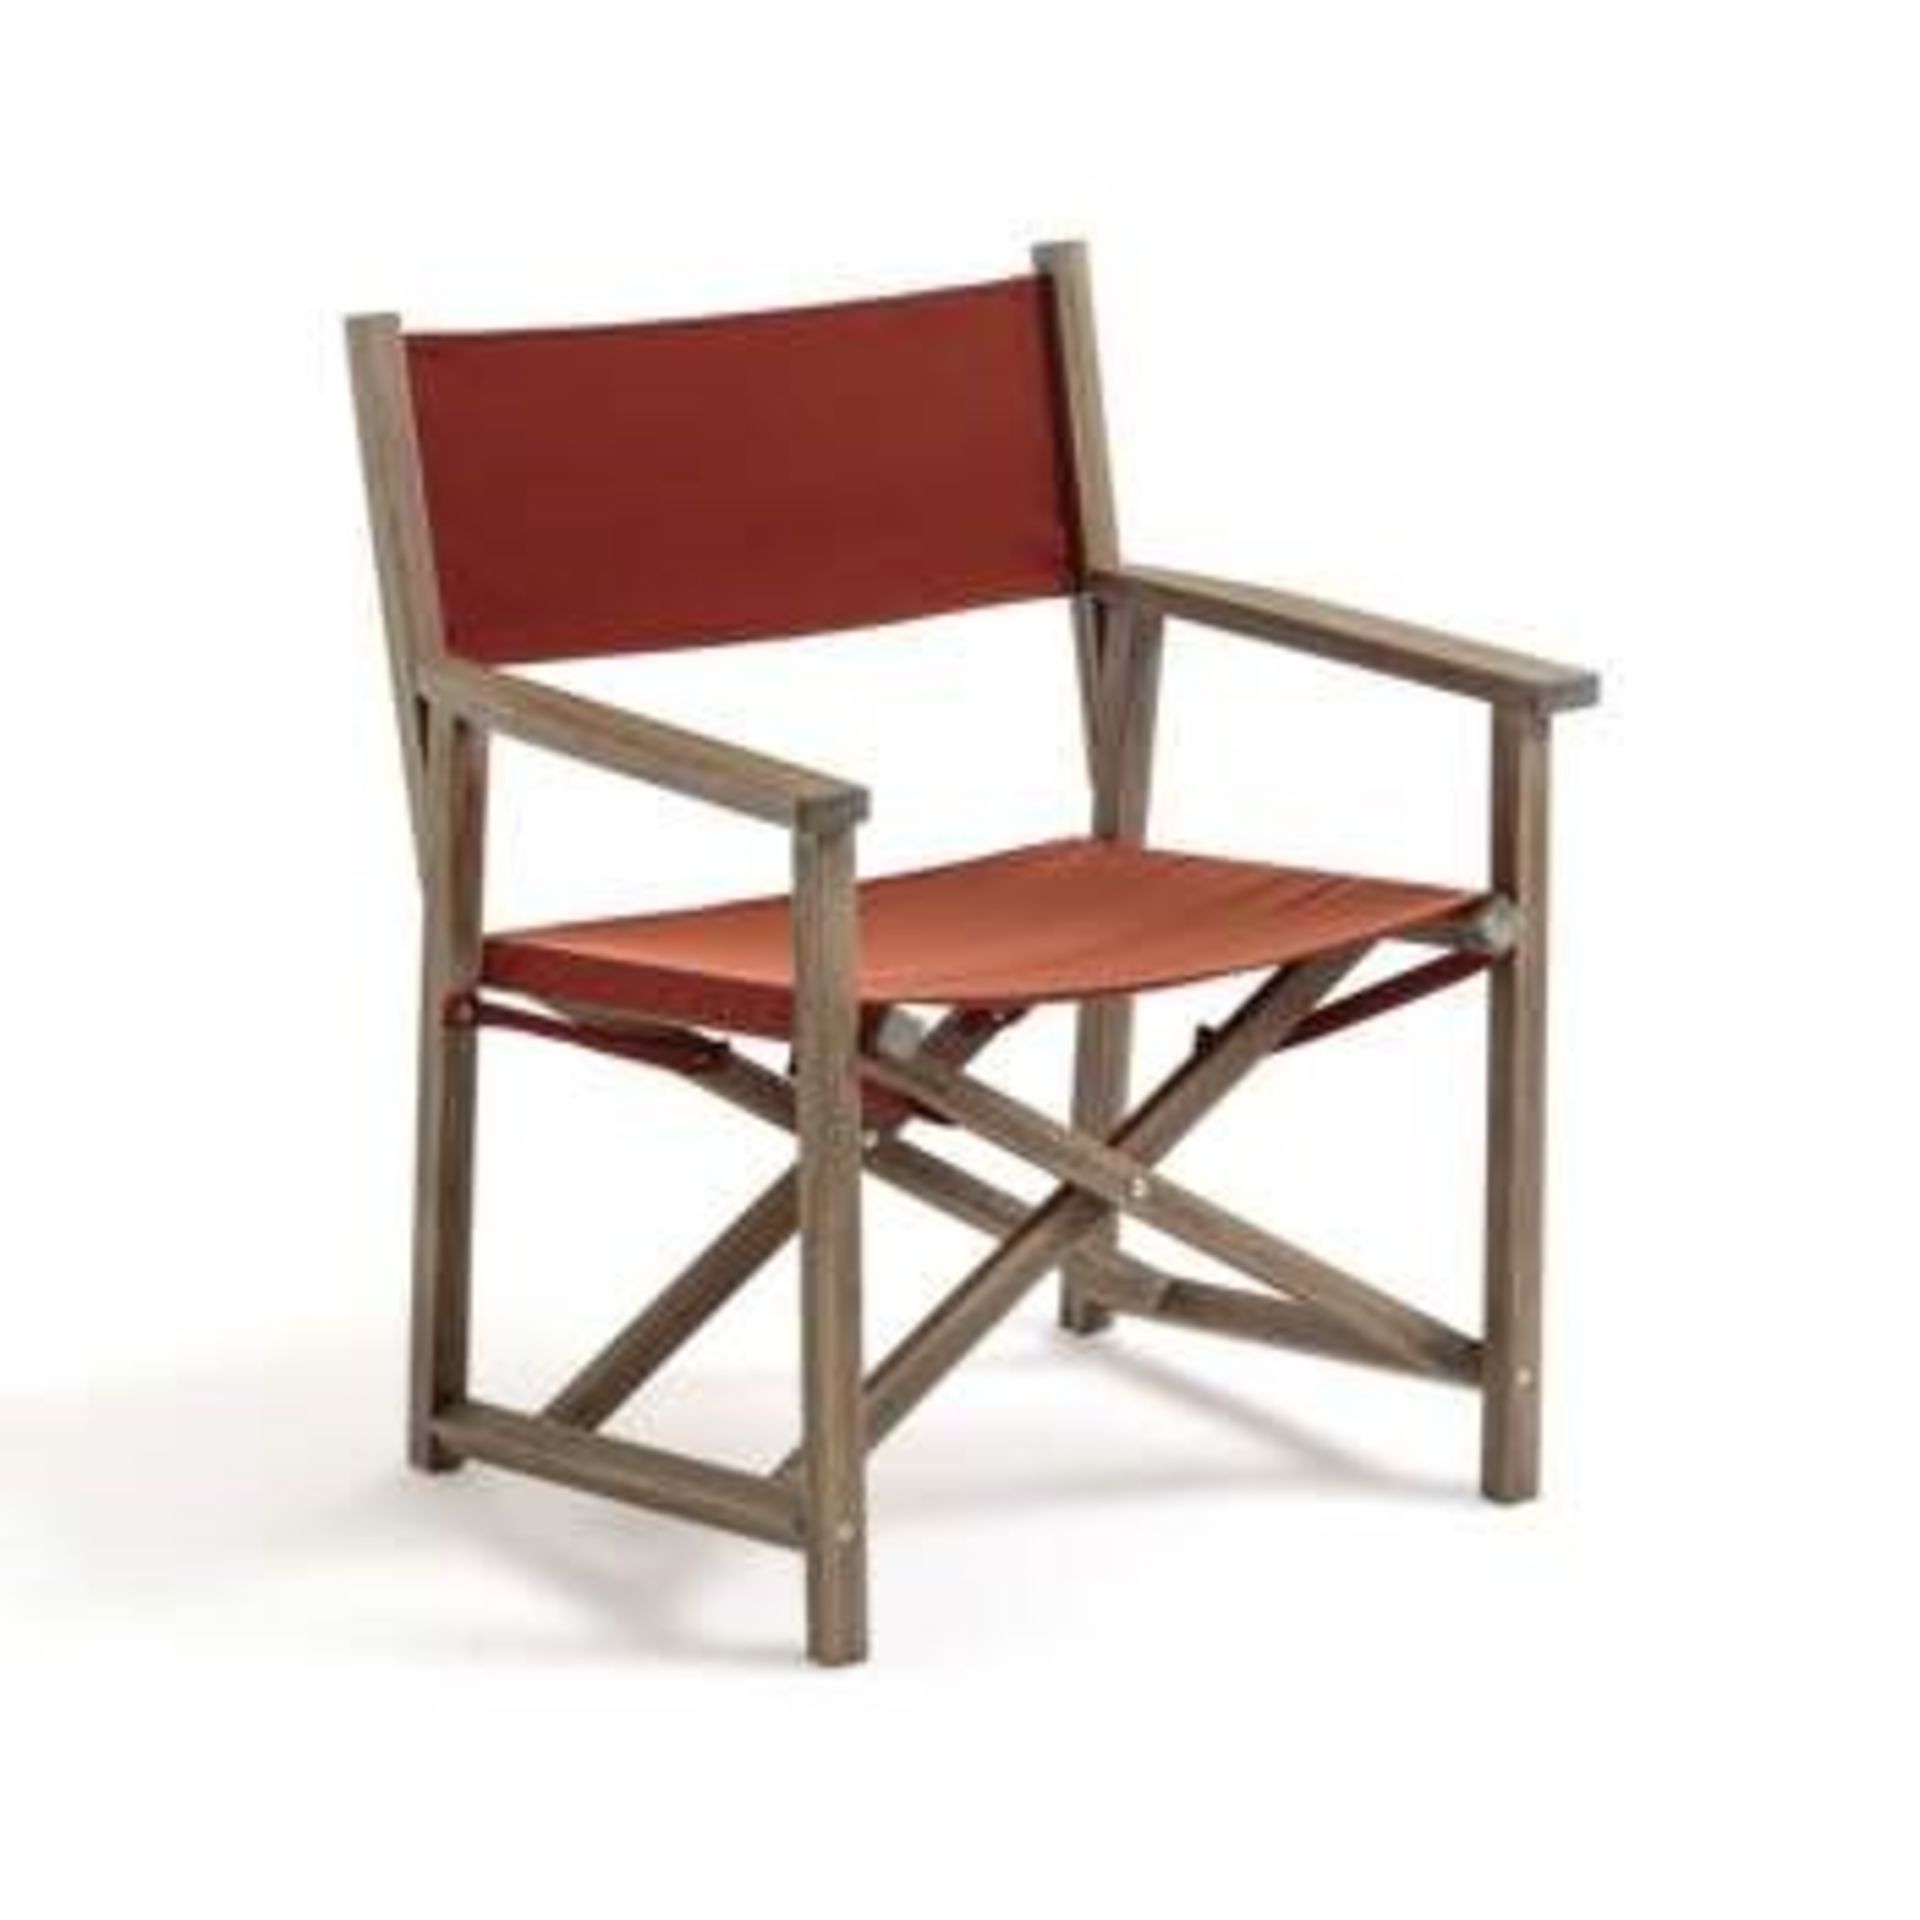 LA REDOUTE ACACIA WOOD DIRECTOR'S CHAIR